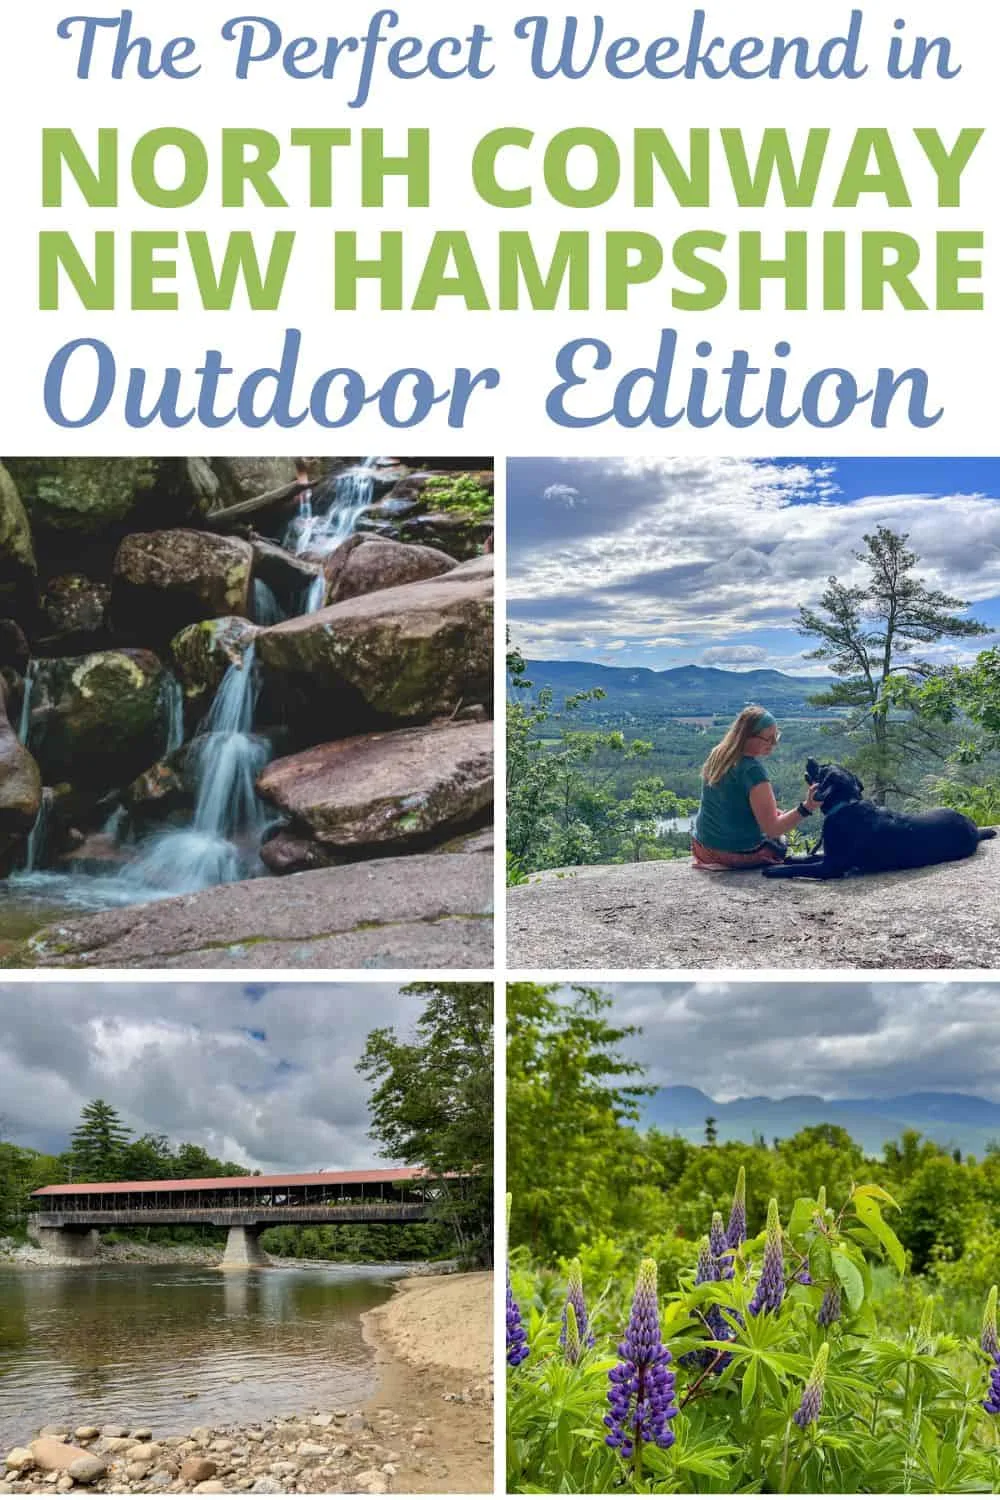 Scenes from the White Mountains and North Conway in New Hampshire. Text overlay reads: The Perfect Weekend in North Conway, New Hampshire, Outdoor Edition.